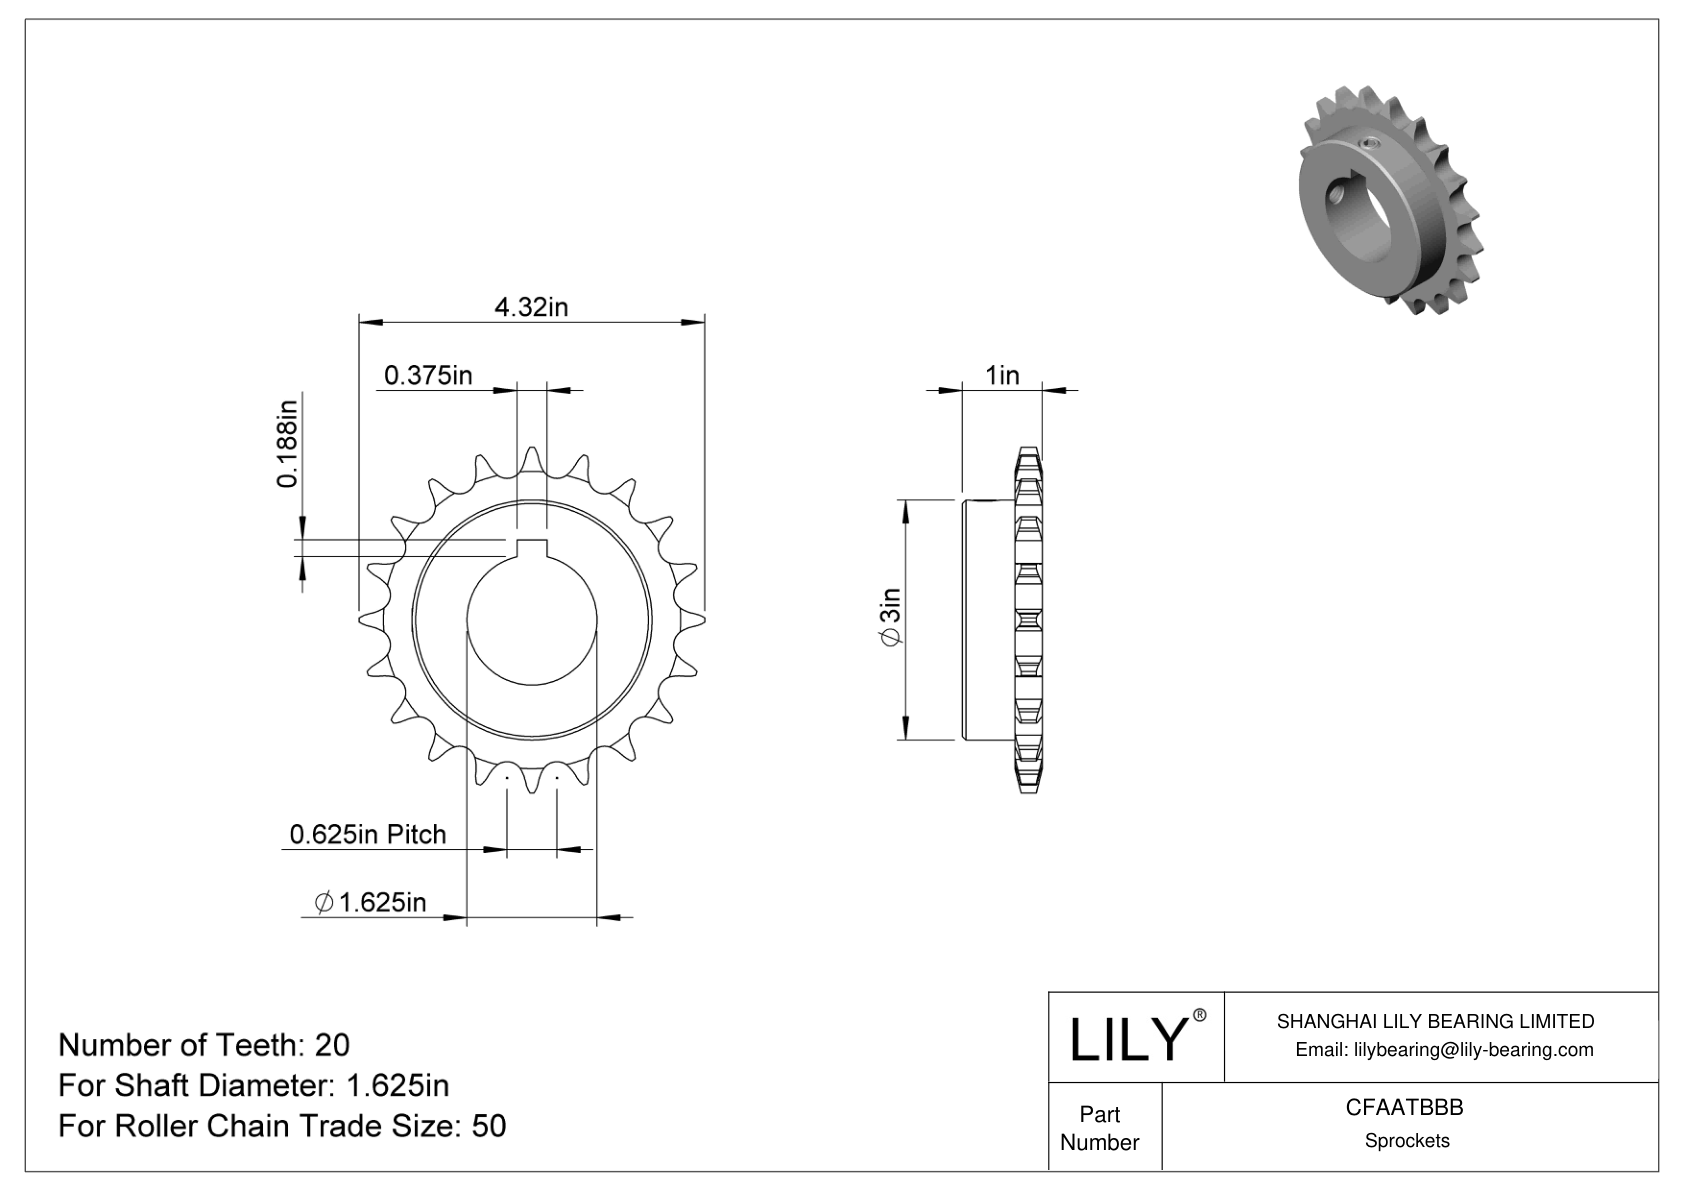 CFAATBBB Wear-Resistant Sprockets for ANSI Roller Chain cad drawing